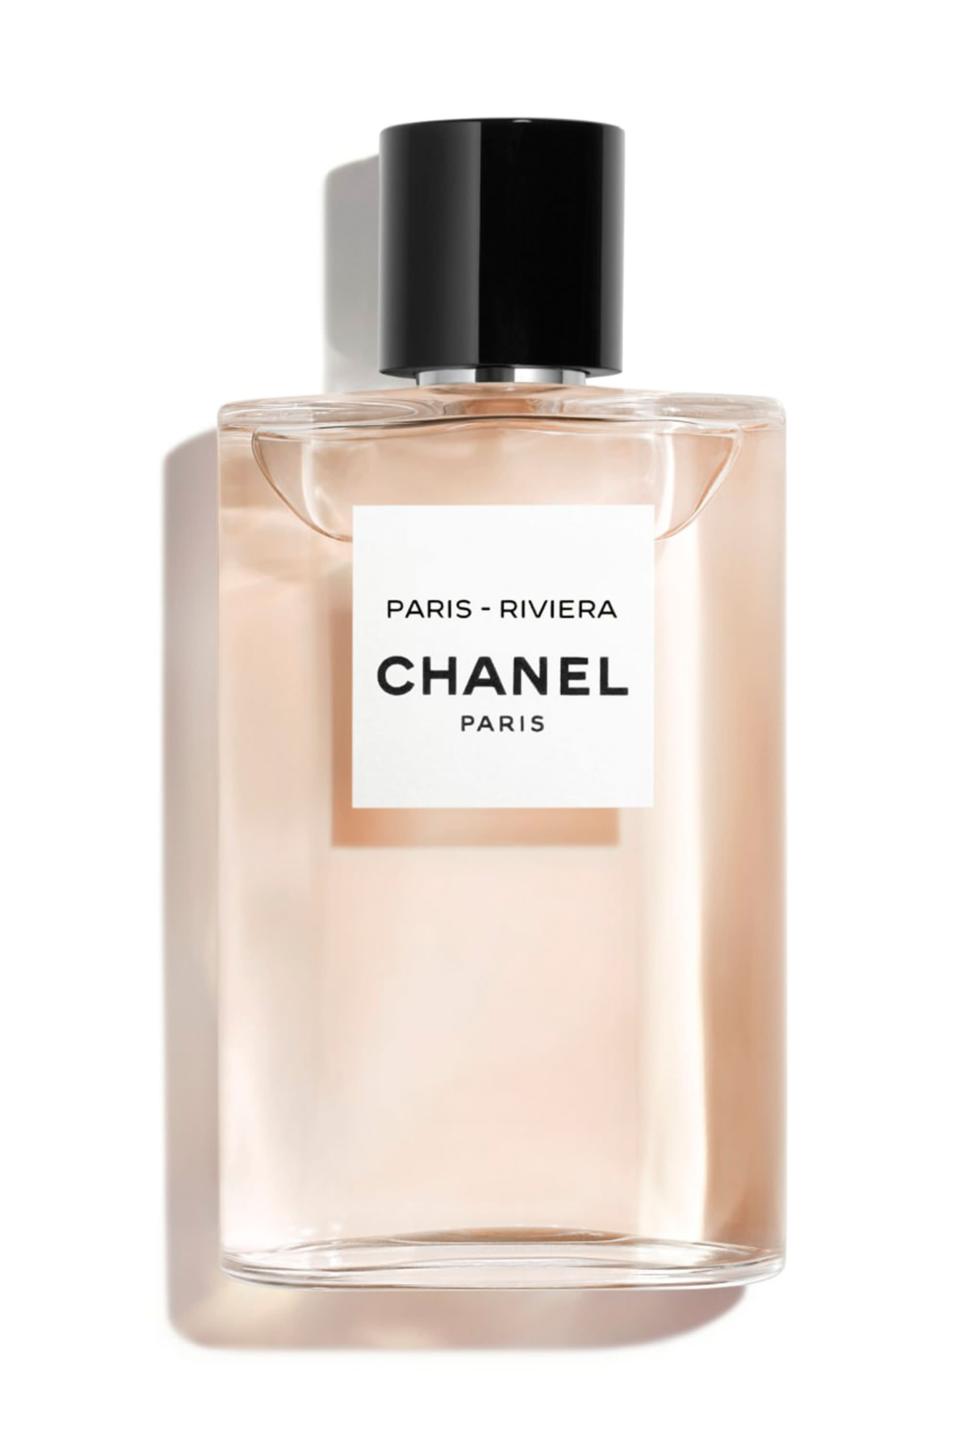 <p><strong>Chanel</strong></p><p>nordstrom.com</p><p><strong>$130.00</strong></p><p><a href="https://go.redirectingat.com?id=74968X1596630&url=https%3A%2F%2Fshop.nordstrom.com%2Fs%2Fchanel-les-eaux-de-chanel-paris-riviera-eau-de-toilette-nordstrom-exclusive%2F5357608&sref=https%3A%2F%2Fwww.elle.com%2Fbeauty%2Fg25477830%2Fbest-winter-perfumes%2F" rel="nofollow noopener" target="_blank" data-ylk="slk:Shop Now" class="link rapid-noclick-resp">Shop Now</a></p><p><strong>The Feels: </strong>This sunny scent is reminiscent of the French Riviera. Touches of sweet, tangy Sicilian orange will the memory of summer linger longer.</p><p><strong>The Notes: </strong></p><p>Top: orange peel, flowers, jasmine and citrus.</p><p>Heart: neroli and jasmine. </p><p>Base: benzoin and sandalwood</p>